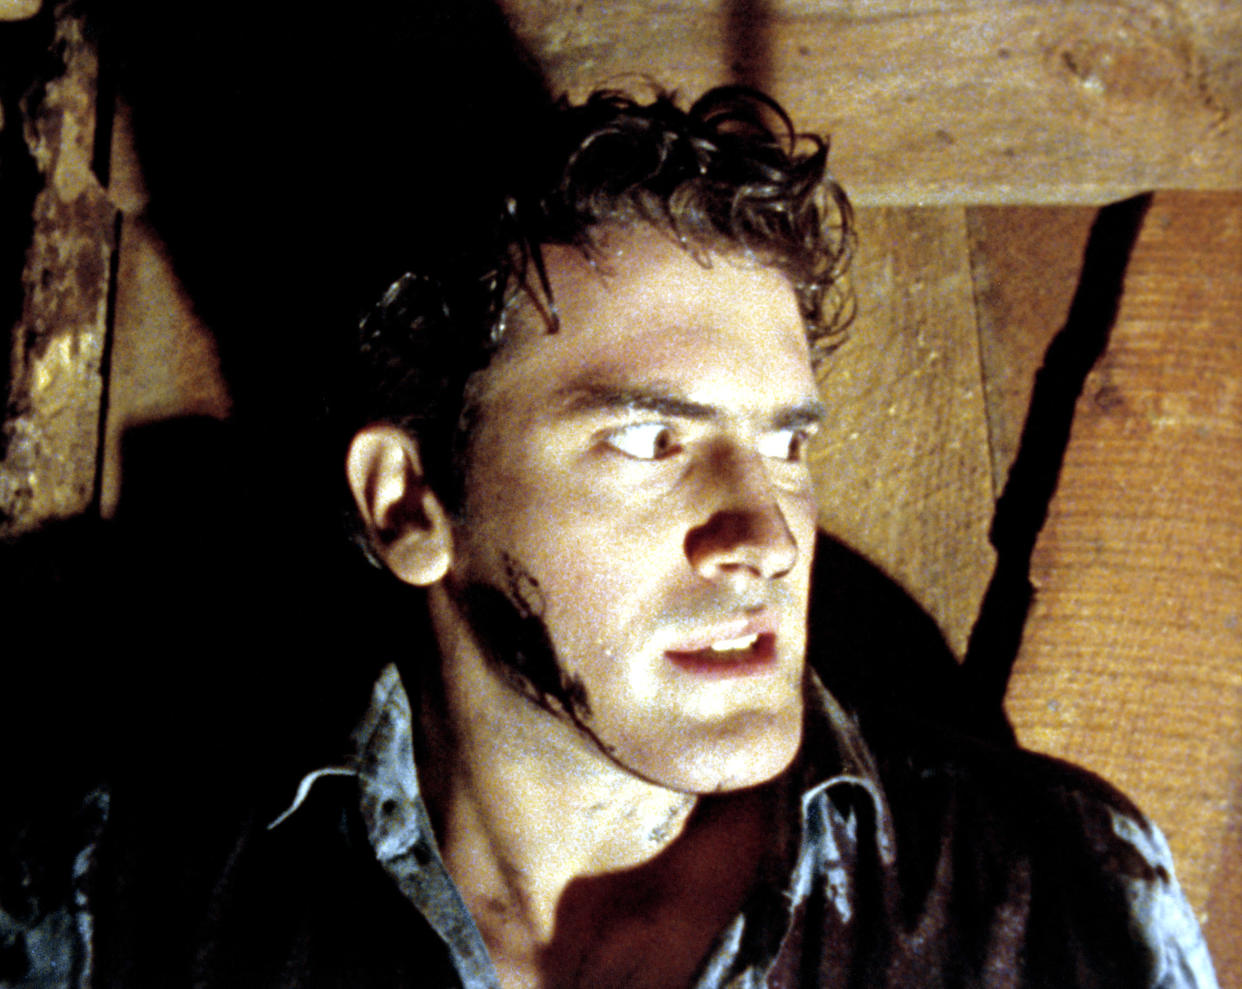 Bruce Campbell made his feature film debut in Sam Raimi's 1981 horror classic, The Evil Dead, which celebrates its 40th anniversary this year. (Photo: New Line/Courtesy Everett Collection)